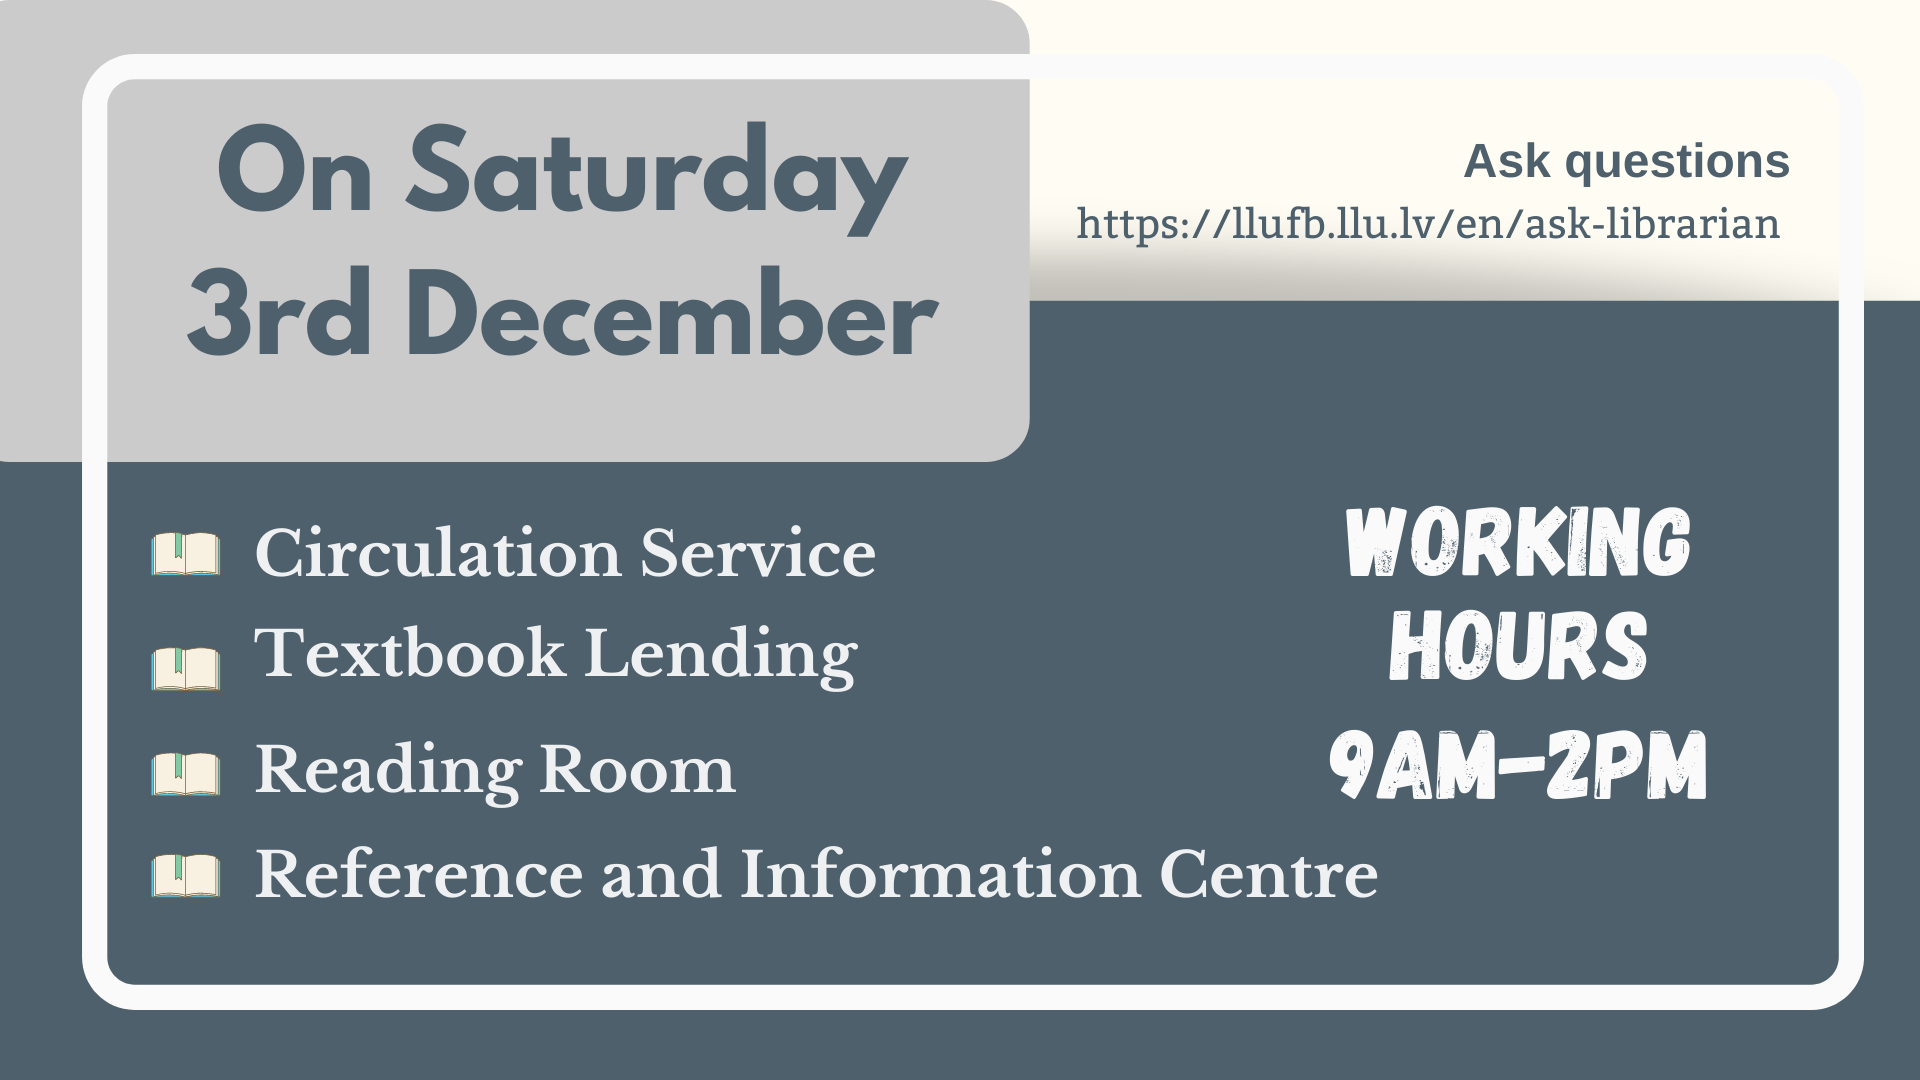 Library of the Latvia University of Life Sciences and Technologies on Saturday 3 December working hours 9am-2pm